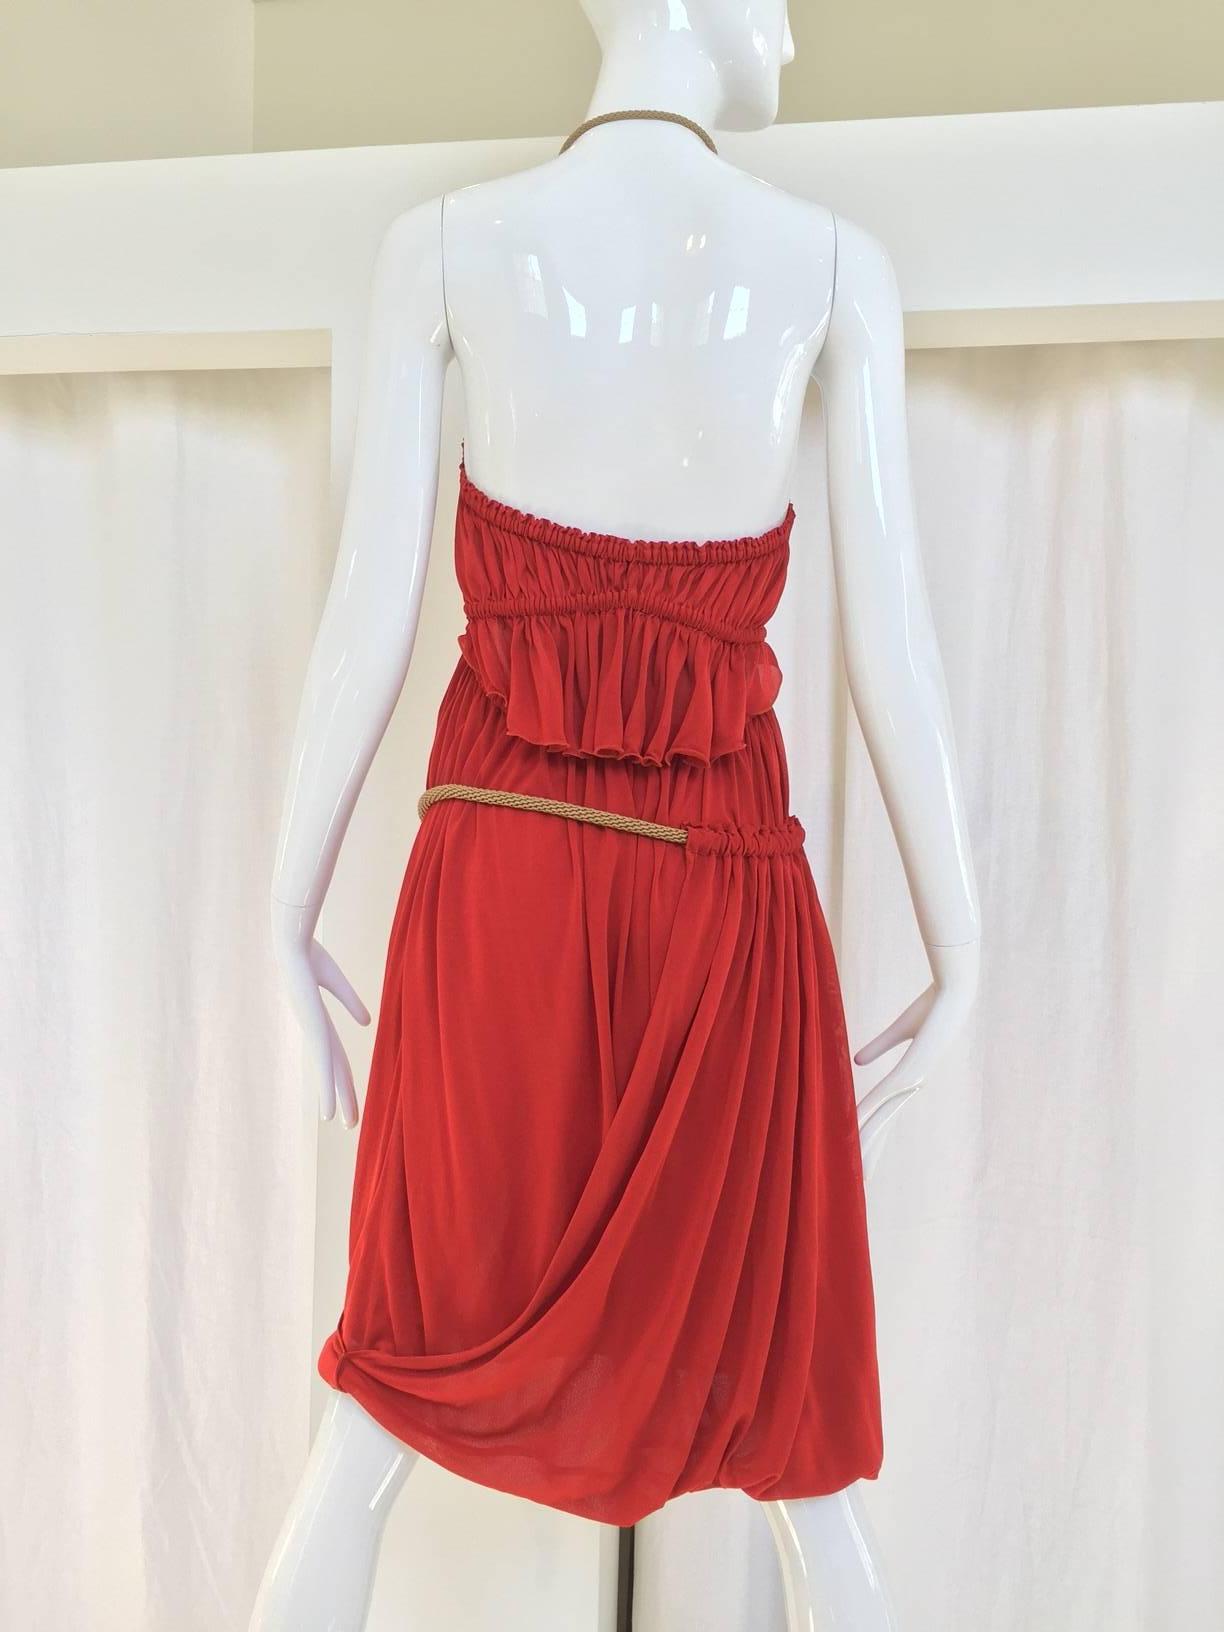 Yves Saint Laurent by Tom Ford red knit V dress halter dress with rope sash ties to neck. Grecian inpired
Size: Small -  Medium 
Bust: 34"/ HIp: 36". fit size 2/4/6